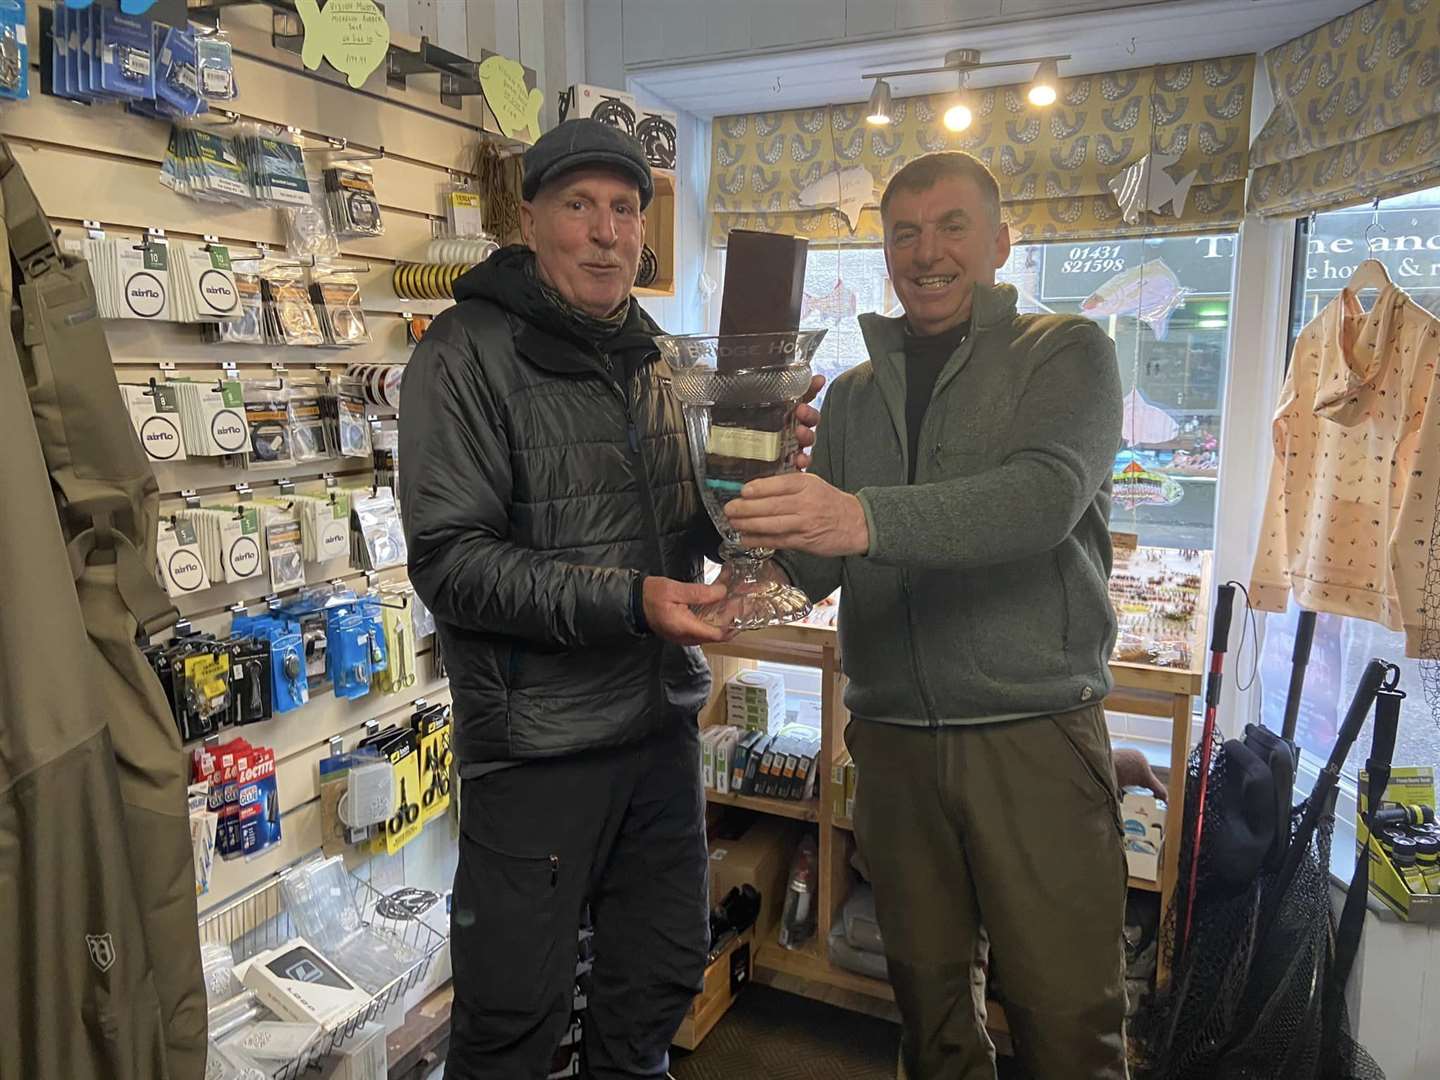 Graham Nichols was presented with the Bridge Hotel Trophy to mark his achievement by Andy Sutherland (Torrish) who caught the first fish last year.